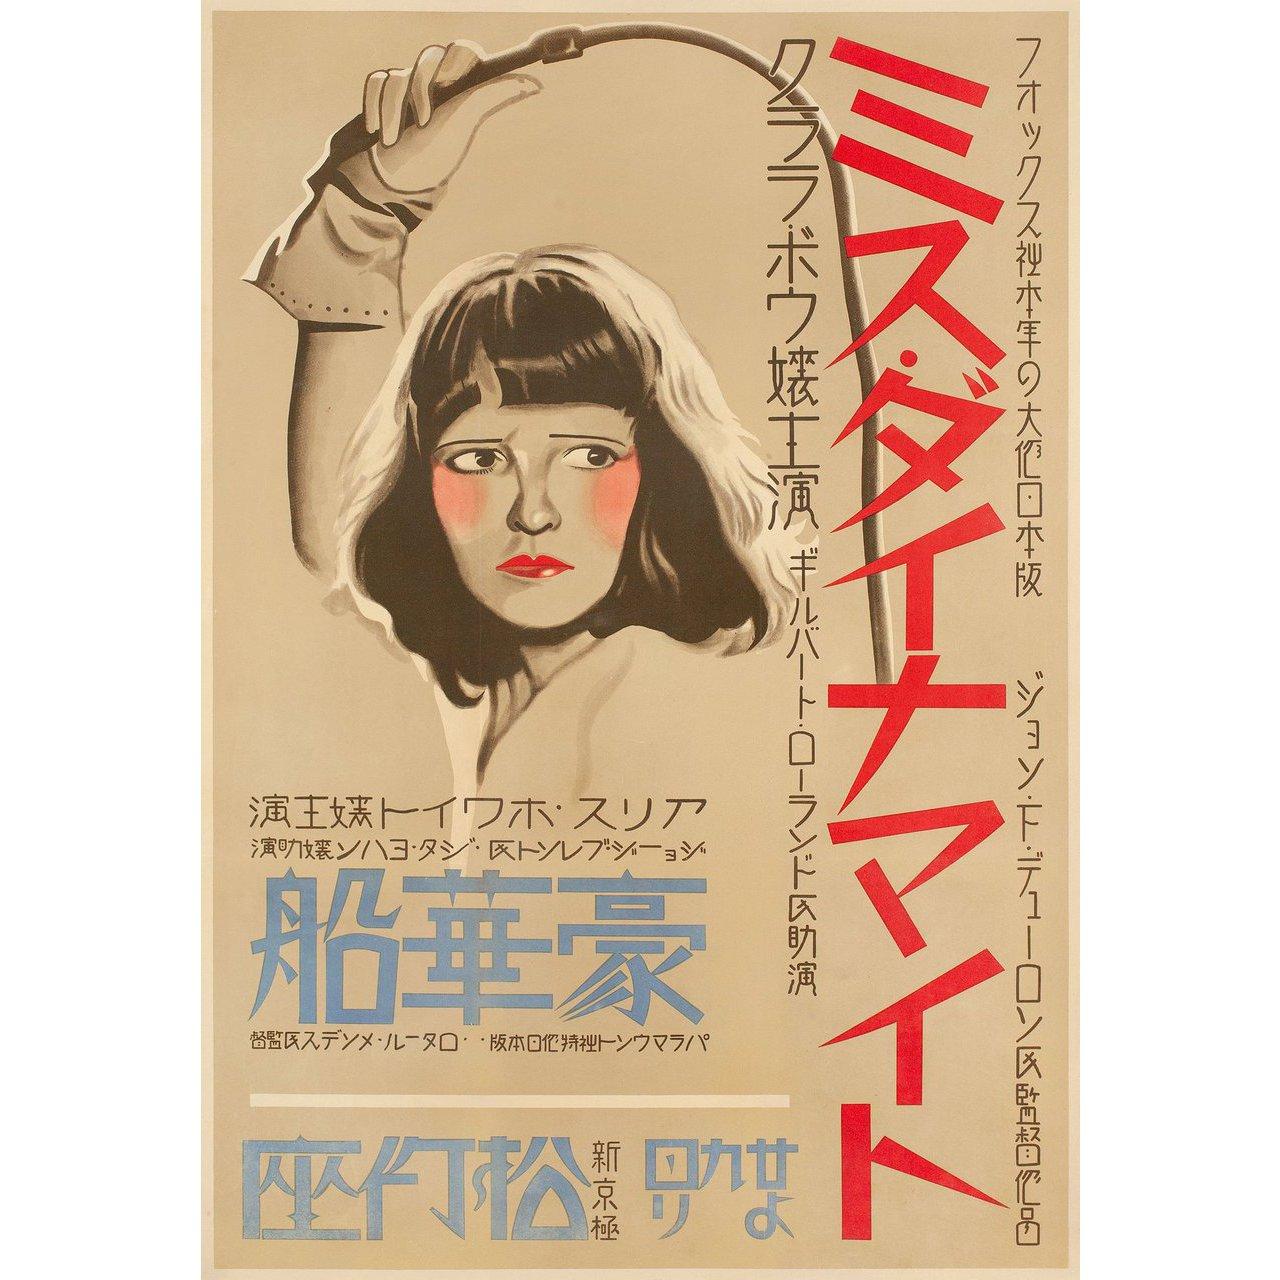 Original 1932 Japanese B2 poster for the film Call Her Savage directed by John Francis Dillon with Clara Bow / Gilbert Roland / Thelma Todd / Monroe Owsley. Fine condition, linen-backed. This poster has been professionally linen-backed. Please note: